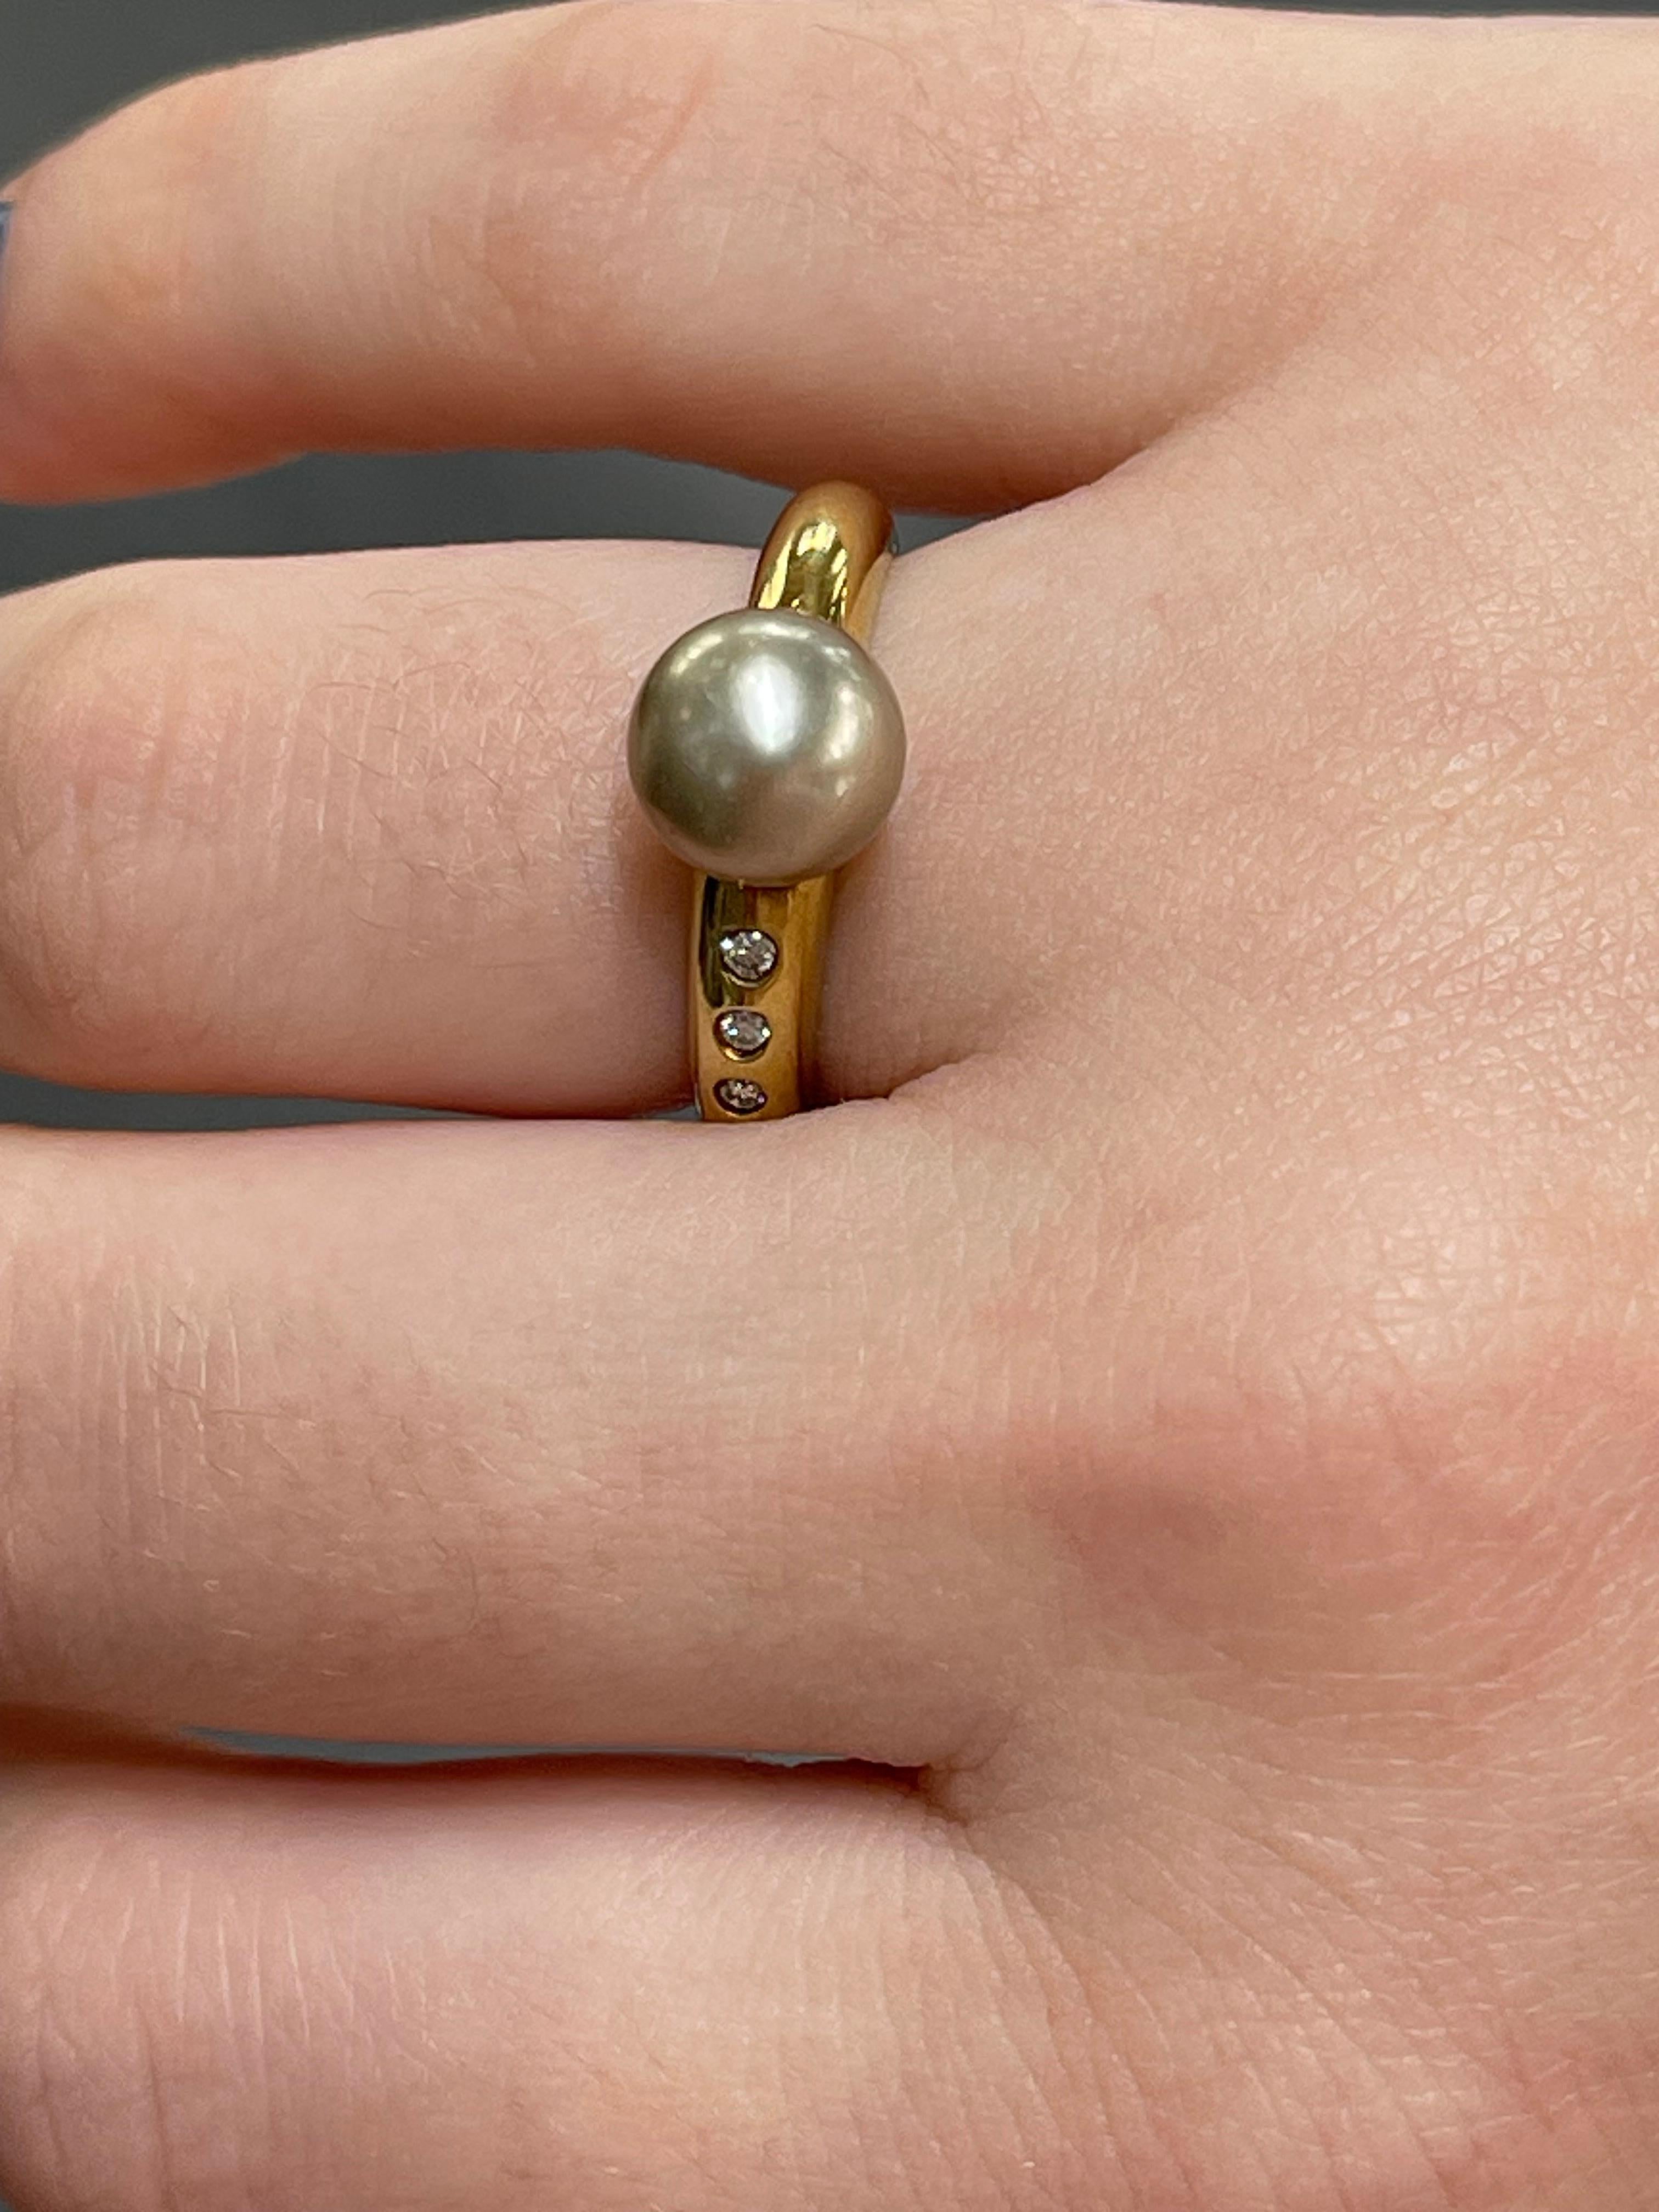 18k yellow gold Tahitian pearl and .06 CTW diamond ring. This ring has three round diamonds to the side of the pearl, the diameter of the pearl is 8 mm, the size of the ring is a 6 1/4, and it has a total weight of 6.65 grams.